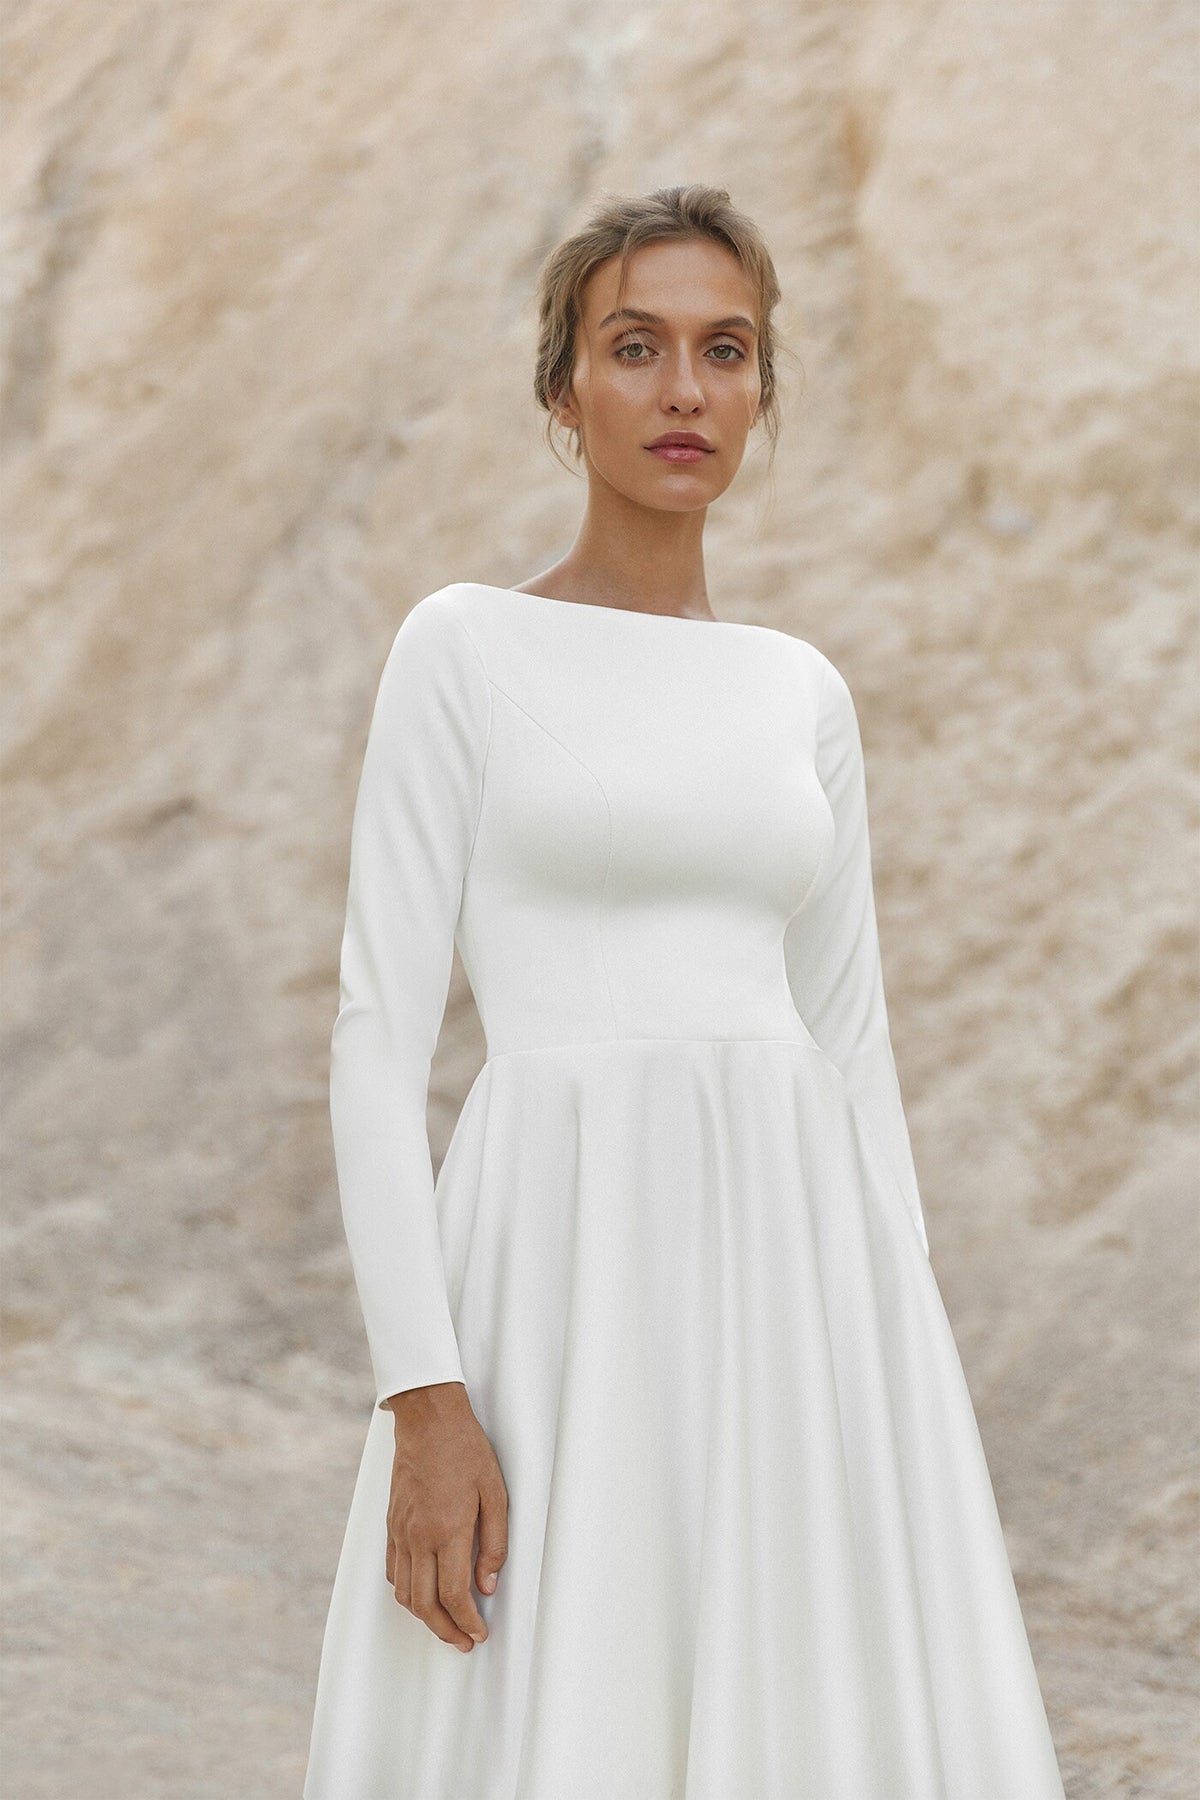 Simple Classic Modest Boatneck Long Fitted Sleeve High Neckline Closed Back Wedding Dress Bridal Gown LDS Long Train Zipper Back Minimalist